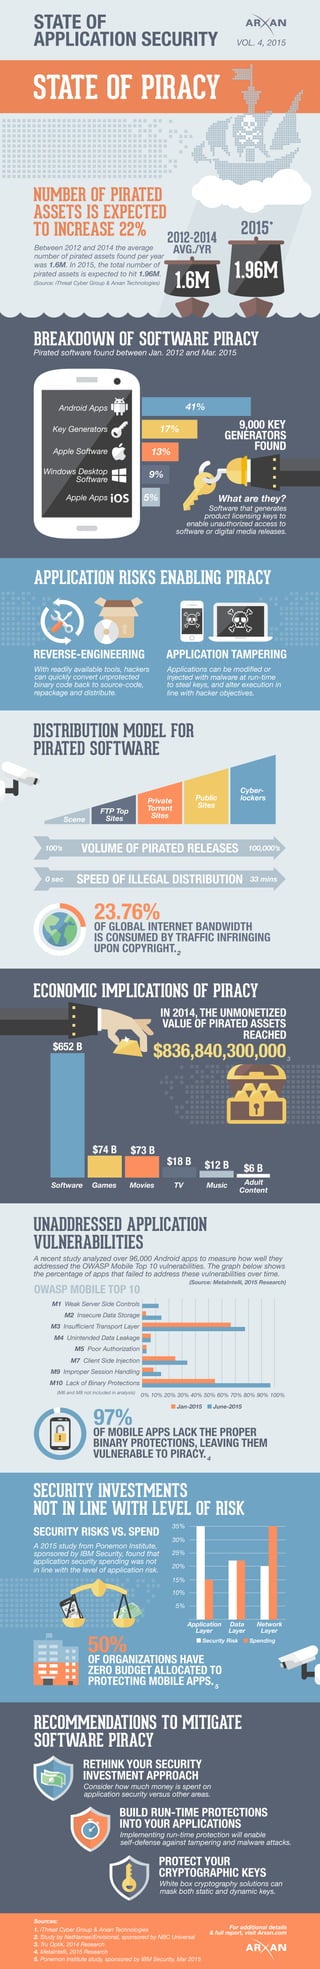 STATE OF
APPLICATION SECURITY VOL. 4, 2015
STATE OF PIRACY
1.6M 1.96M
ASSETS IS EXPECTED
NUMBER OF PIRATED
Pirated software found between Jan. 2012 and Mar. 2015
BREAKDOWN OF SOFTWARE PIRACY
Between 2012 and 2014 the average
Android Apps
Key Generators
Apple Software
Windows Desktop
Software
Apple Apps
number of pirated assets found per year
2012-2014
AVG./YR
2015*
was 1.6M. In 2015, the total number of
41%
17%
13%
9%
5%
KEY9,000
GENERATORS
FOUND
Software that generates
product licensing keys to
enable unauthorized access to
software or digital media releases.
What are they?
APPLICATION RISKS ENABLING PIRACY
DISTRIBUTION MODEL FOR
REVERSE-ENGINEERING APPLICATION TAMPERING
With readily available tools, hackers
can quickly convert unprotected
binary code back to source-code,
repackage and distribute.
VOLUME OF PIRATED RELEASES
SPEED OF ILLEGAL DISTRIBUTION
100’s 100,000’s
0 sec 33 mins
Scene
FTP Top
Sites
Private
Torrent
Sites
Public
Sites
Cyber-
lockers
Applications can be modified or
injected with malware at run-time
to steal keys, and alter execution in
line with hacker objectives.
23.76%
OF GLOBAL INTERNET BANDWIDTH
IS CONSUMED BY TRAFFIC INFRINGING
UPON COPYRIGHT.
ECONOMIC IMPLICATIONS OF PIRACY
2
pirated assets is expected to hit 1.96M.
(Source: iThreat Cyber Group & Arxan Technologies)
TO INCREASE 22%
PIRATED SOFTWARE
IN 2014, THE UNMONETIZED
VALUE OF PIRATED ASSETS
REACHED
$836,840,300,000$652 B
$74 B $73 B
$18 B $12 B $6 B
Software Games Movies TV Music Adult
Content
UNADDRESSED APPLICATION
VULNERABILITIES
M1 Weak Server Side Controls
M2 Insecure Data Storage
M3 Insufficient Transport Layer
M4 Unintended Data Leakage
M5 Poor Authorization
M7 Client Side Injection
M9 Improper Session Handling
M10 Lack of Binary Protections
0% 10% 20% 30% 40% 50% 60% 70% 80% 90% 100%
Jan-2015 June-2015
OWASP MOBILE TOP 10
97%
OF MOBILE APPS LACK THE PROPER
BINARY PROTECTIONS, LEAVING THEM
VULNERABLE TO PIRACY.
50%
OF ORGANIZATIONS HAVE
ZERO BUDGET ALLOCATED TO
PROTECTING MOBILE APPS.
(M6 and M8 not included in analysis)
A recent study analyzed over 96,000 Android apps to measure how well they
addressed the OWASP Mobile Top 10 vulnerabilities. The graph below shows
the percentage of apps that failed to address these vulnerabilities over time.
RECOMMENDATIONS TO MITIGATE
SOFTWARE PIRACY
35%
30%
25%
20%
15%
10%
5%
Application
Layer
Data
Layer
Network
Layer
RETHINK YOUR SECURITY
INVESTMENT APPROACH
Consider how much money is spent on
application security versus other areas.
BUILD RUN-TIME PROTECTIONS
INTO YOUR APPLICATIONS
Implementing run-time protection will enable
self-defense against tampering and malware attacks.
Security Risk Spending
A 2015 study from Ponemon Institute,
sponsored by IBM Security, found that
application security spending was not
PROTECT YOUR
CRYPTOGRAPHIC KEYS
White box cryptography solutions can
mask both static and dynamic keys.
SECURITY RISKS VS. SPEND
(Source: MetaIntelli, 2015 Research)
Sources:
1. iThreat Cyber Group & Arxan Technologies
2. Study by NetNames/Envisional, sponsored by NBC Universal
3. Tru Optik, 2014 Research
4. MetaIntelli, 2015 Research
5. Ponemon Institute study, sponsored by IBM Security, Mar 2015
3
4
5
SECURITY INVESTMENTS
NOT IN LINE WITH LEVEL OF RISK
in line with the level of application risk.
For additional details
& full report, visit Arxan.com
 